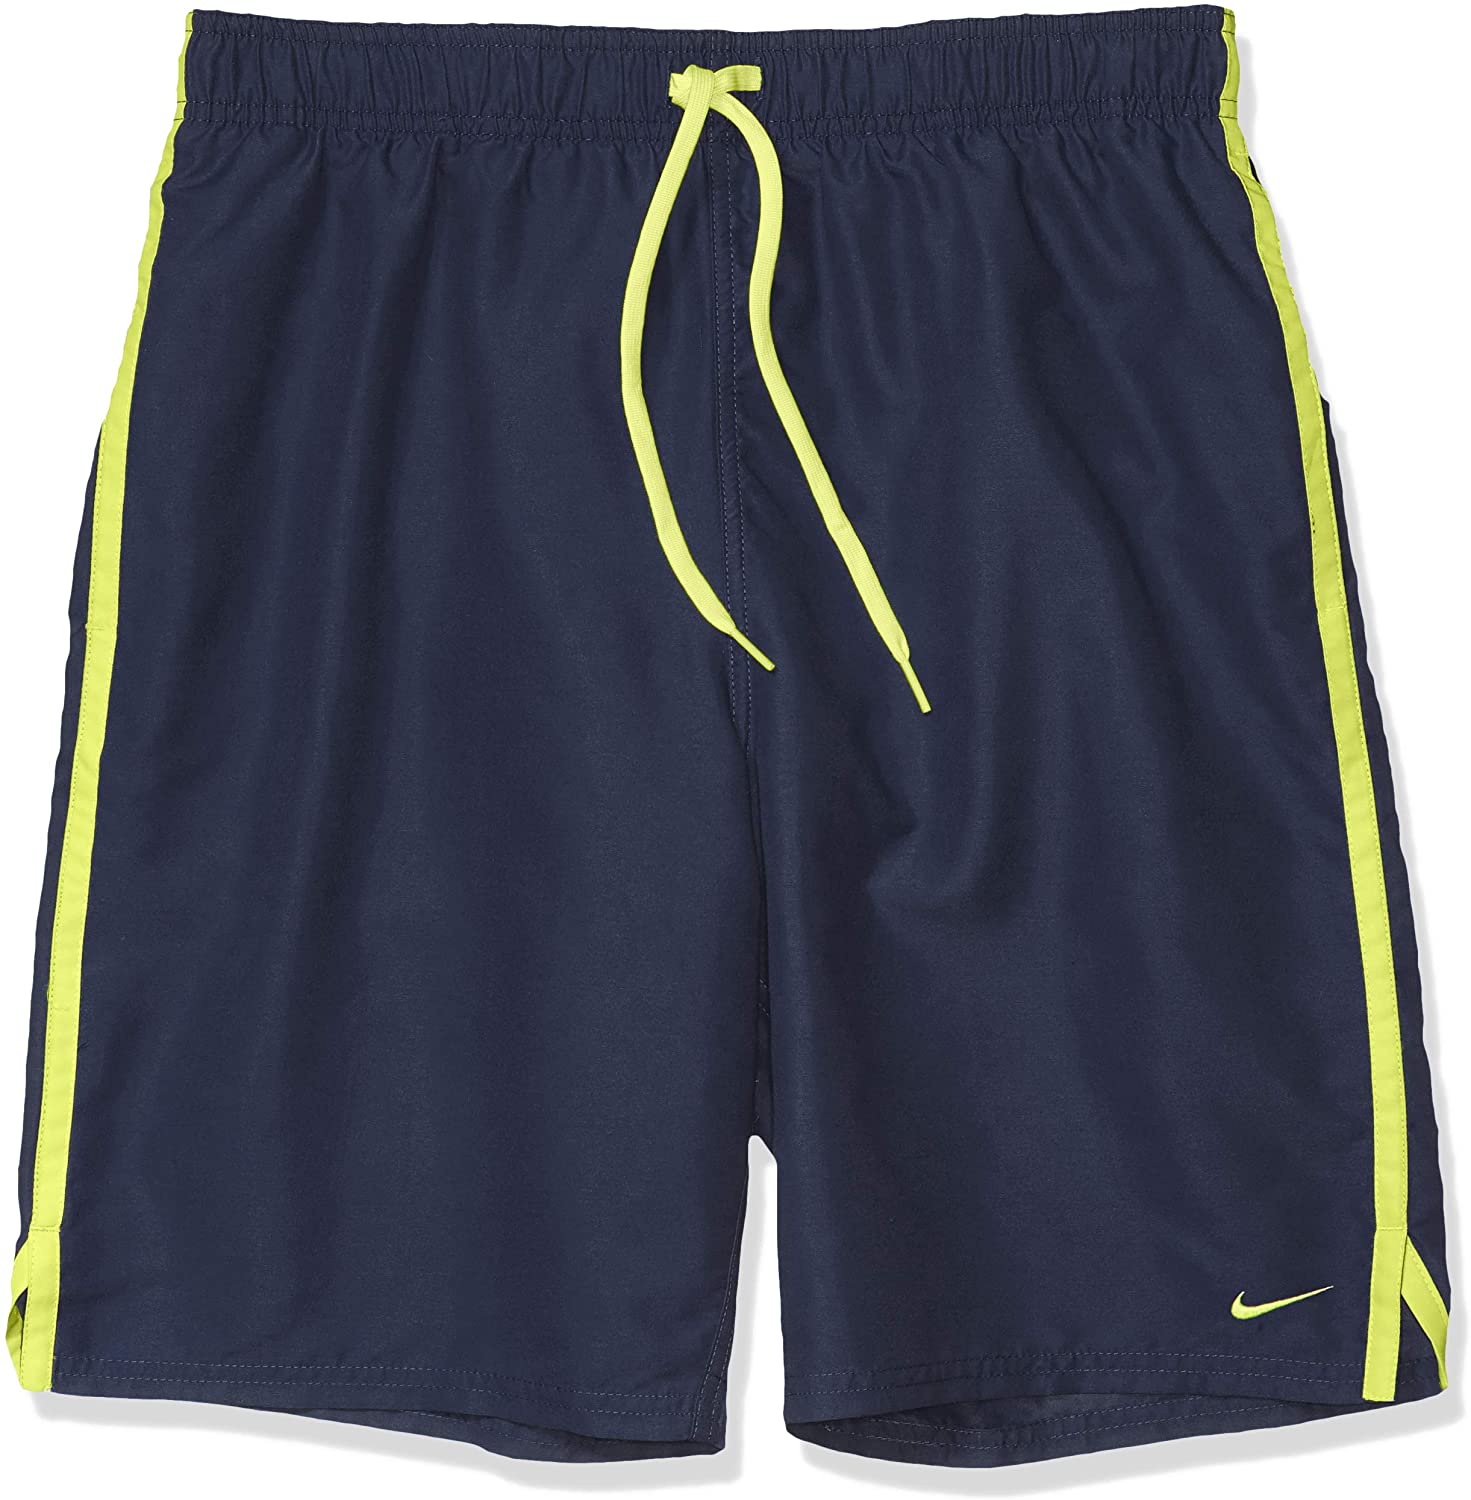 Men's Nike Diverge 9" Volley Short Swim Trunk in Midnight Navy color from the front